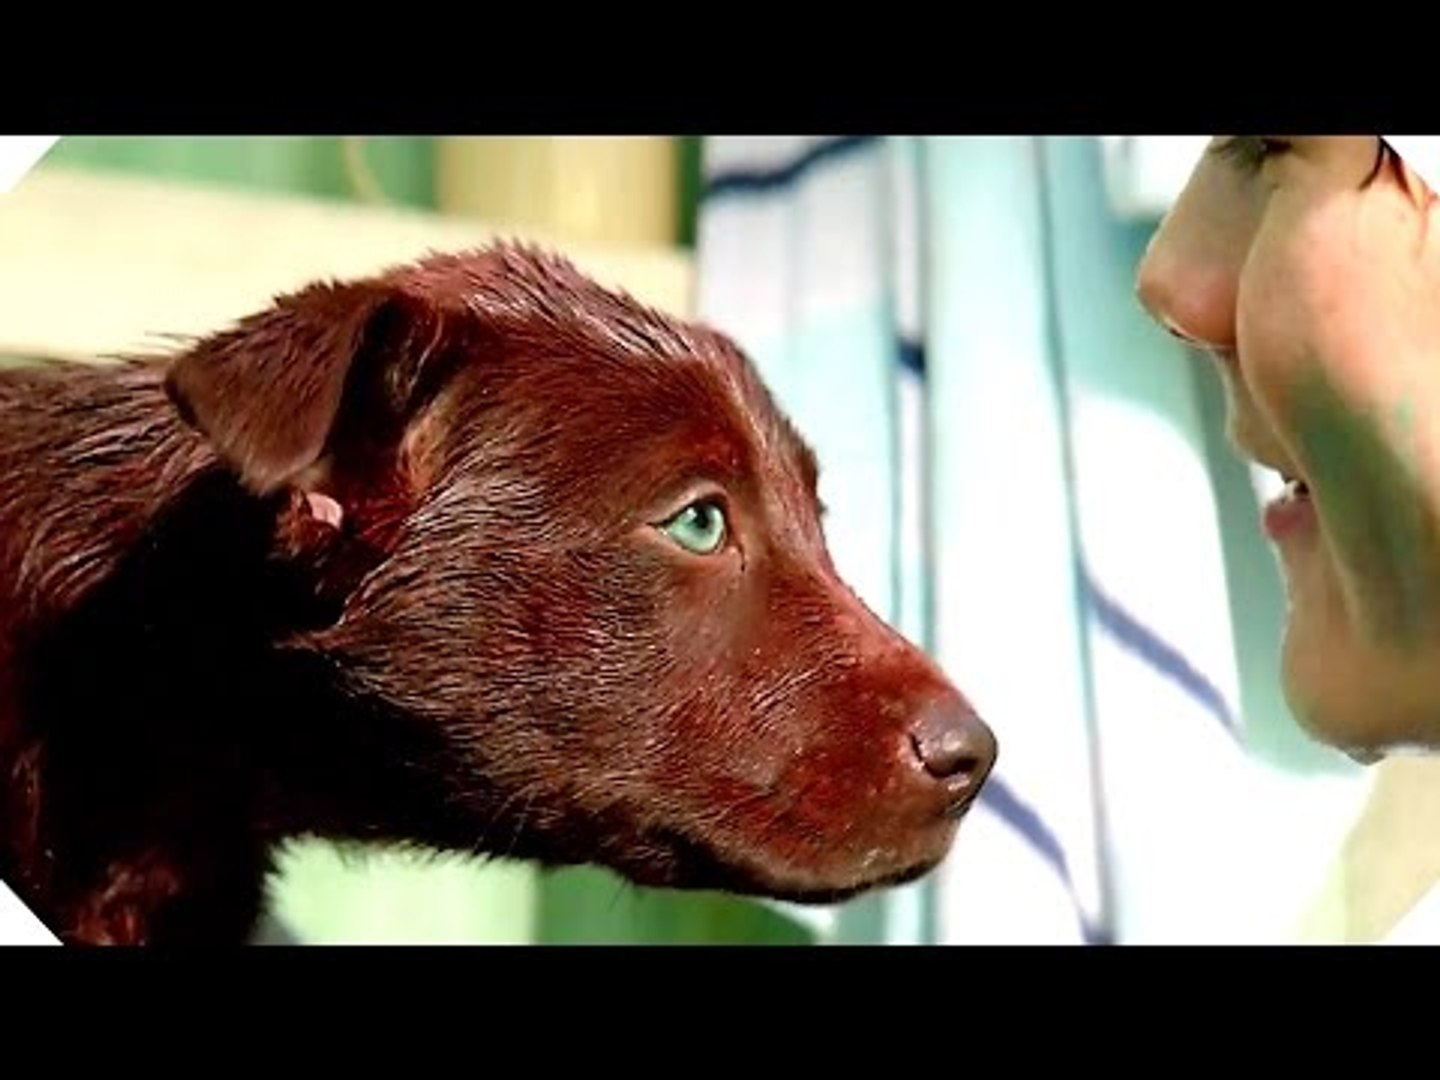 RED DOG: TRUE BLUE Trailer (Dog Movie, Family - 2016) - video Dailymotion